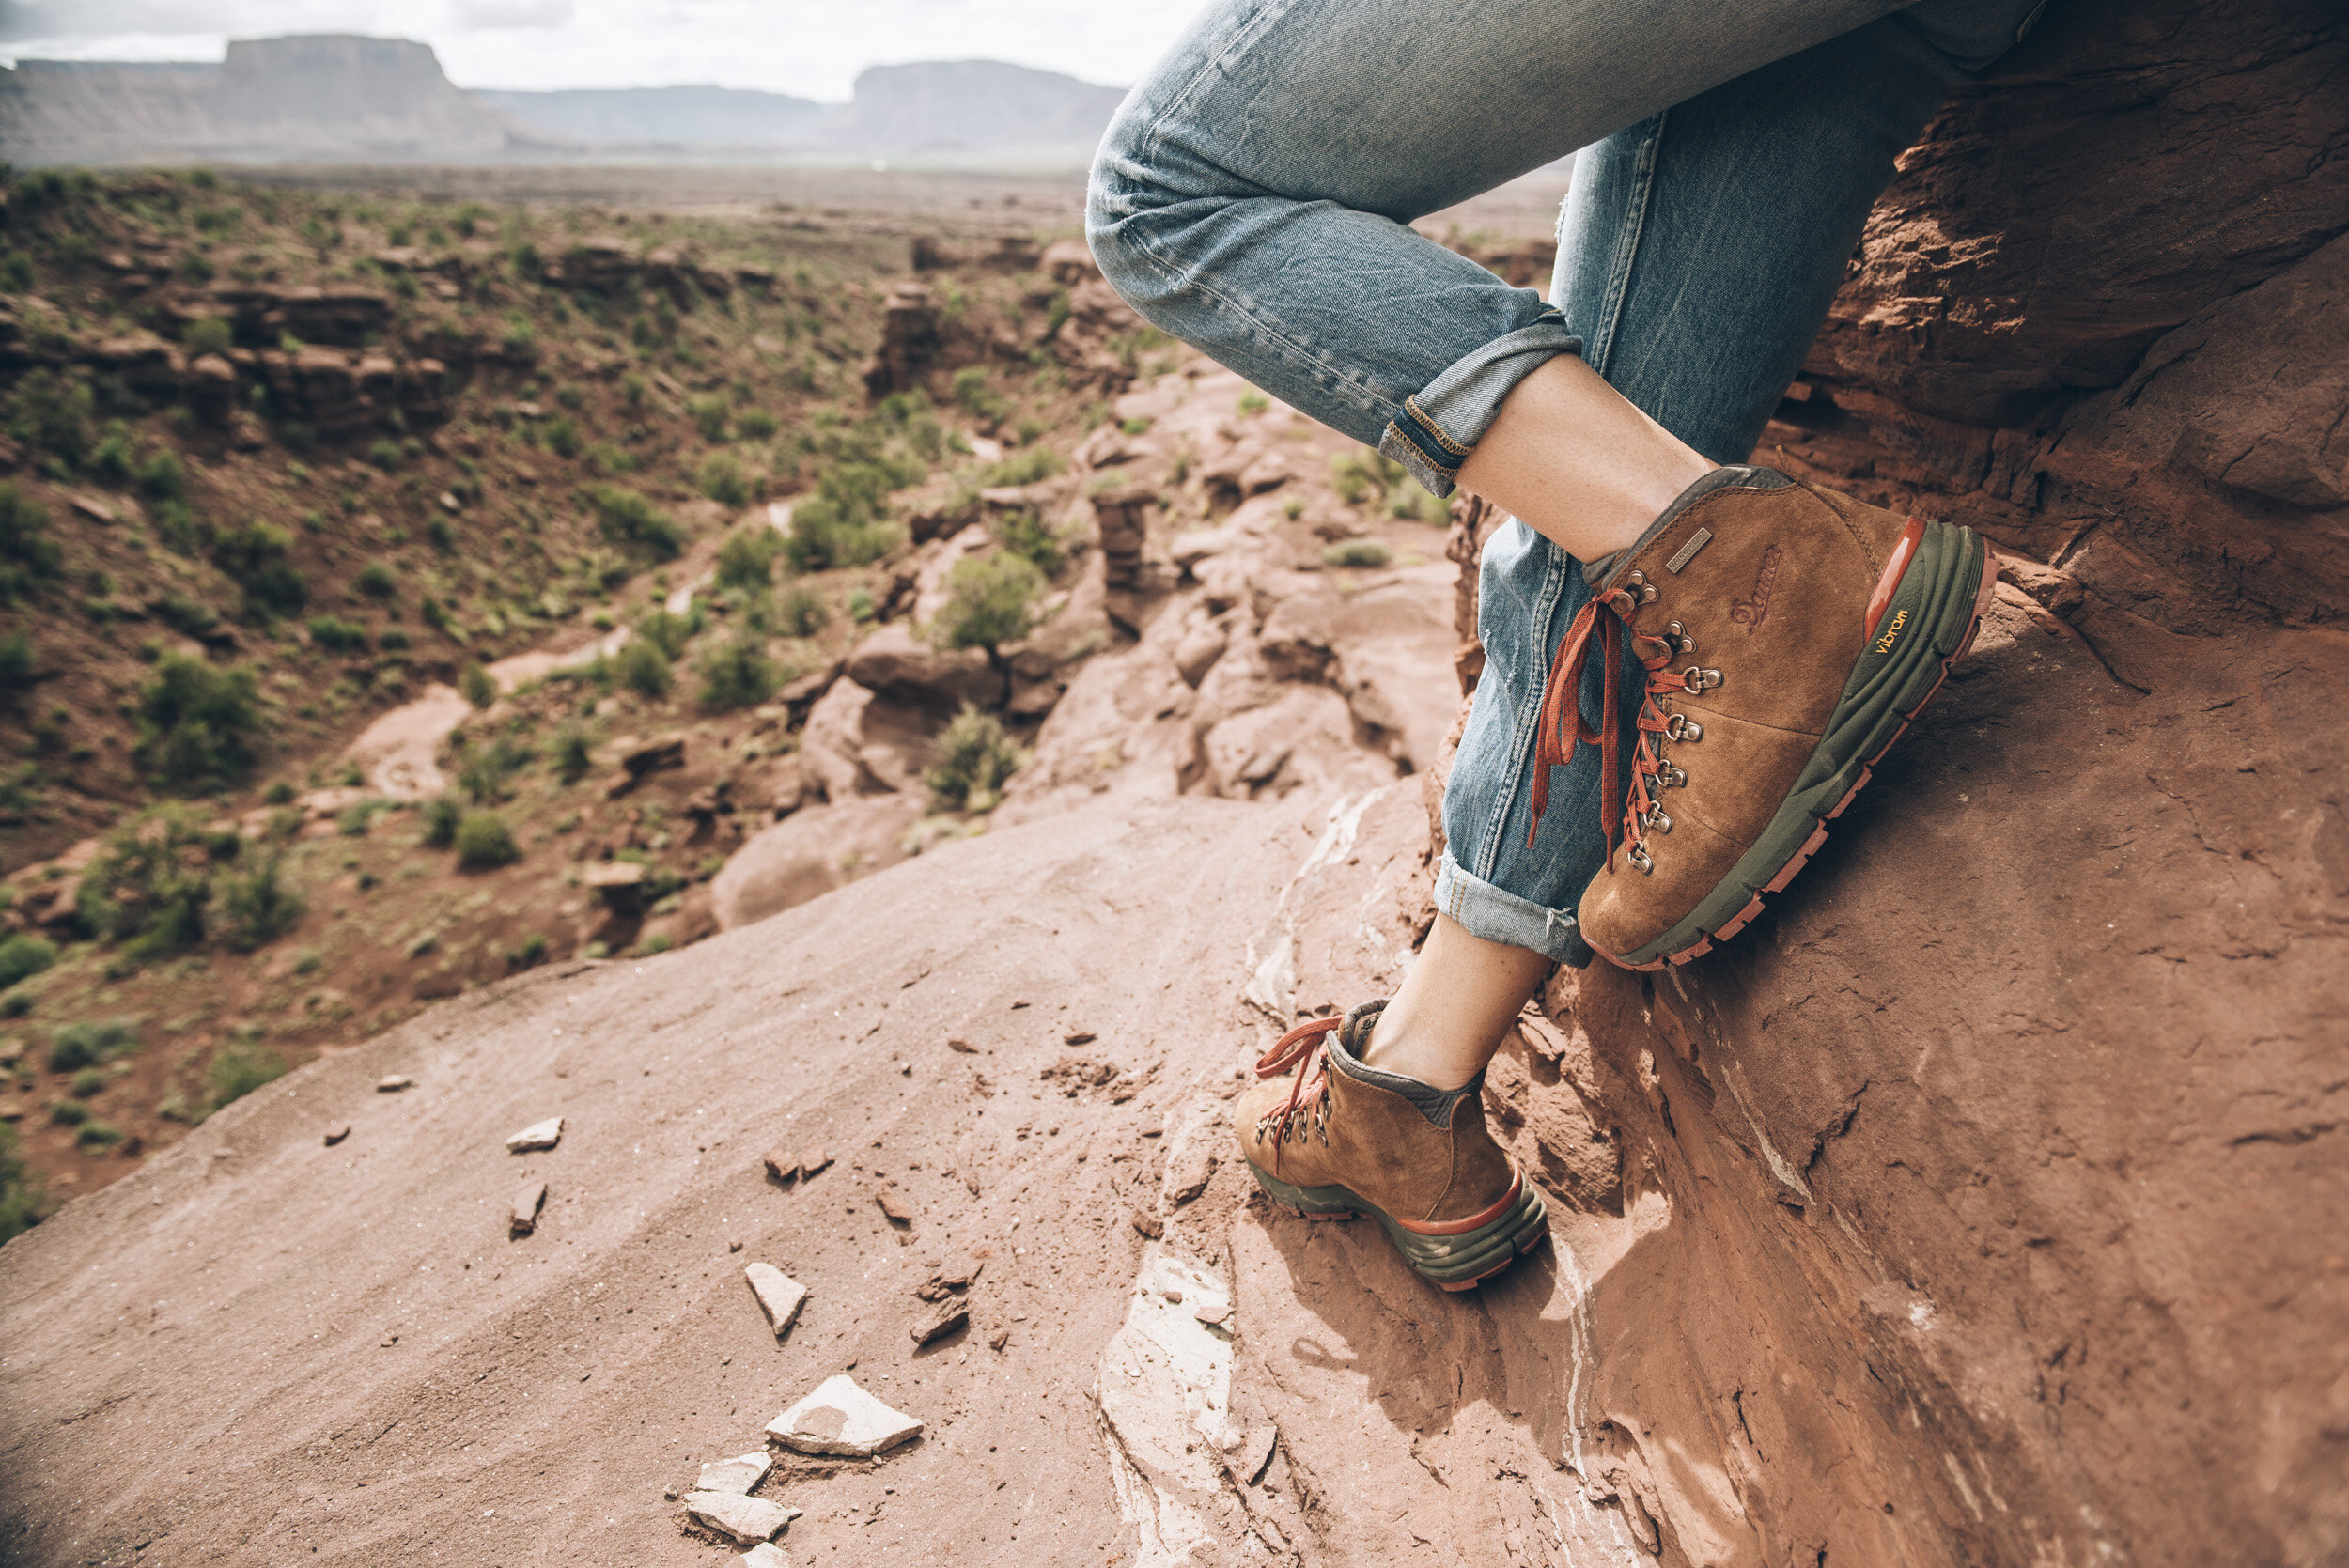 Spring-hiking-in-Danner-Mountain-600-womens-boots-at-Fischer-Towers-in-Castle-Valley-near-Moab-Utah.jpg